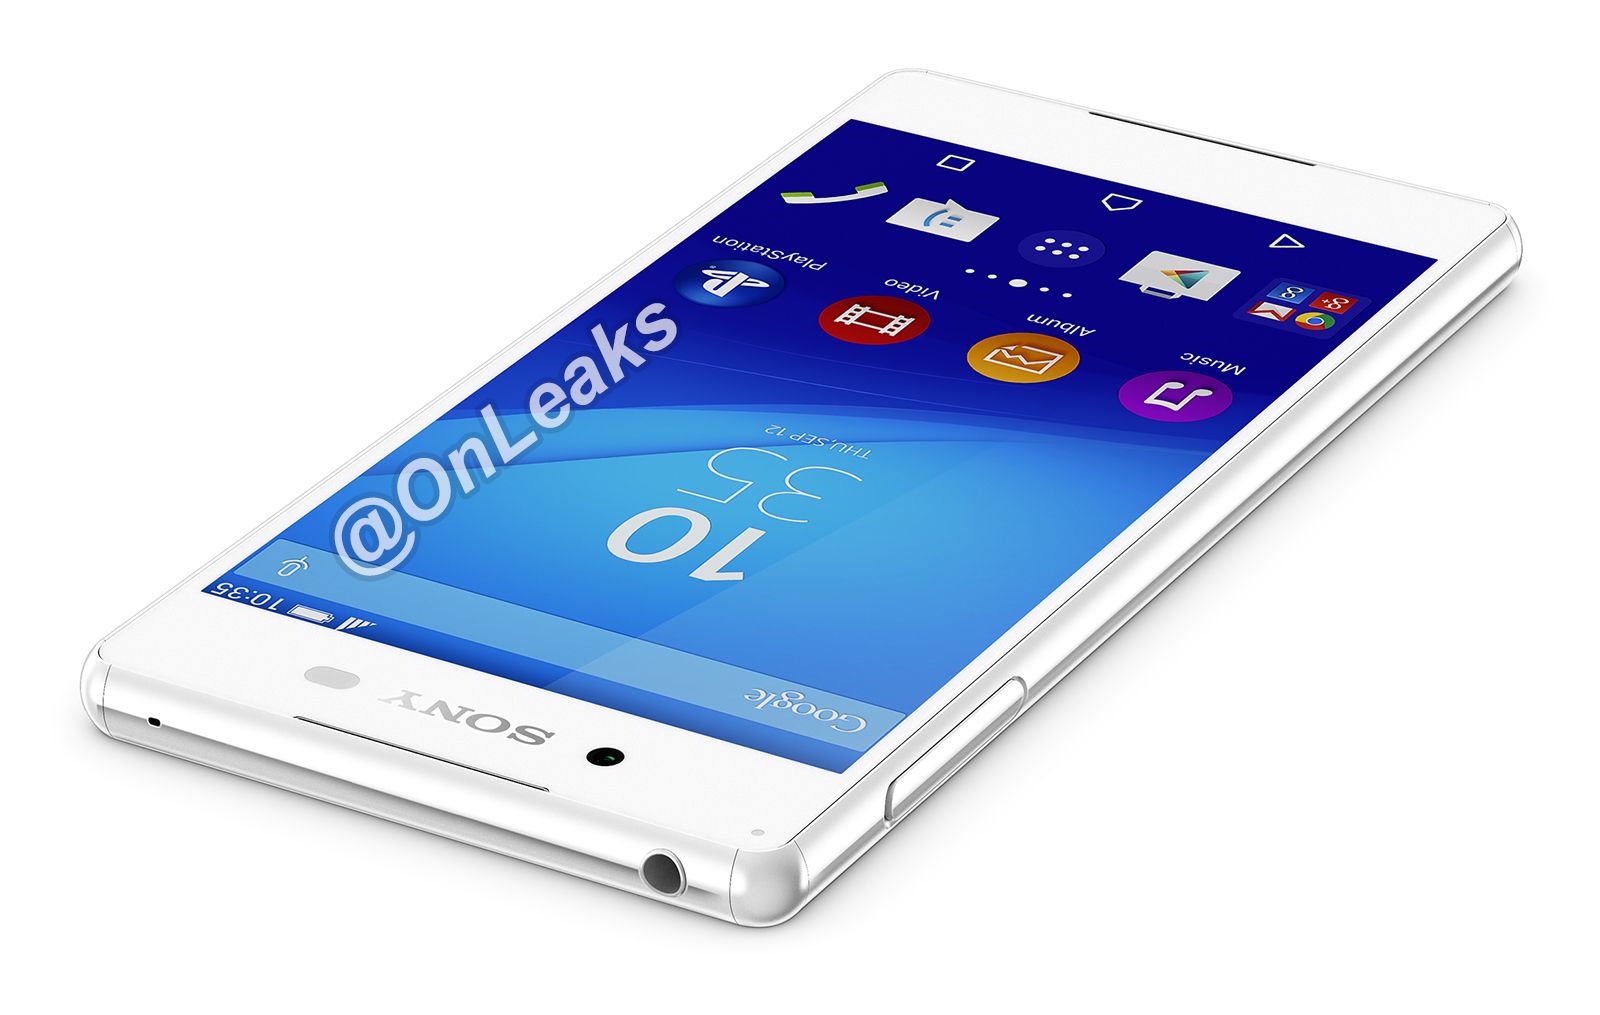 sony xperia z4 release date rumours and everything you need to know image 9